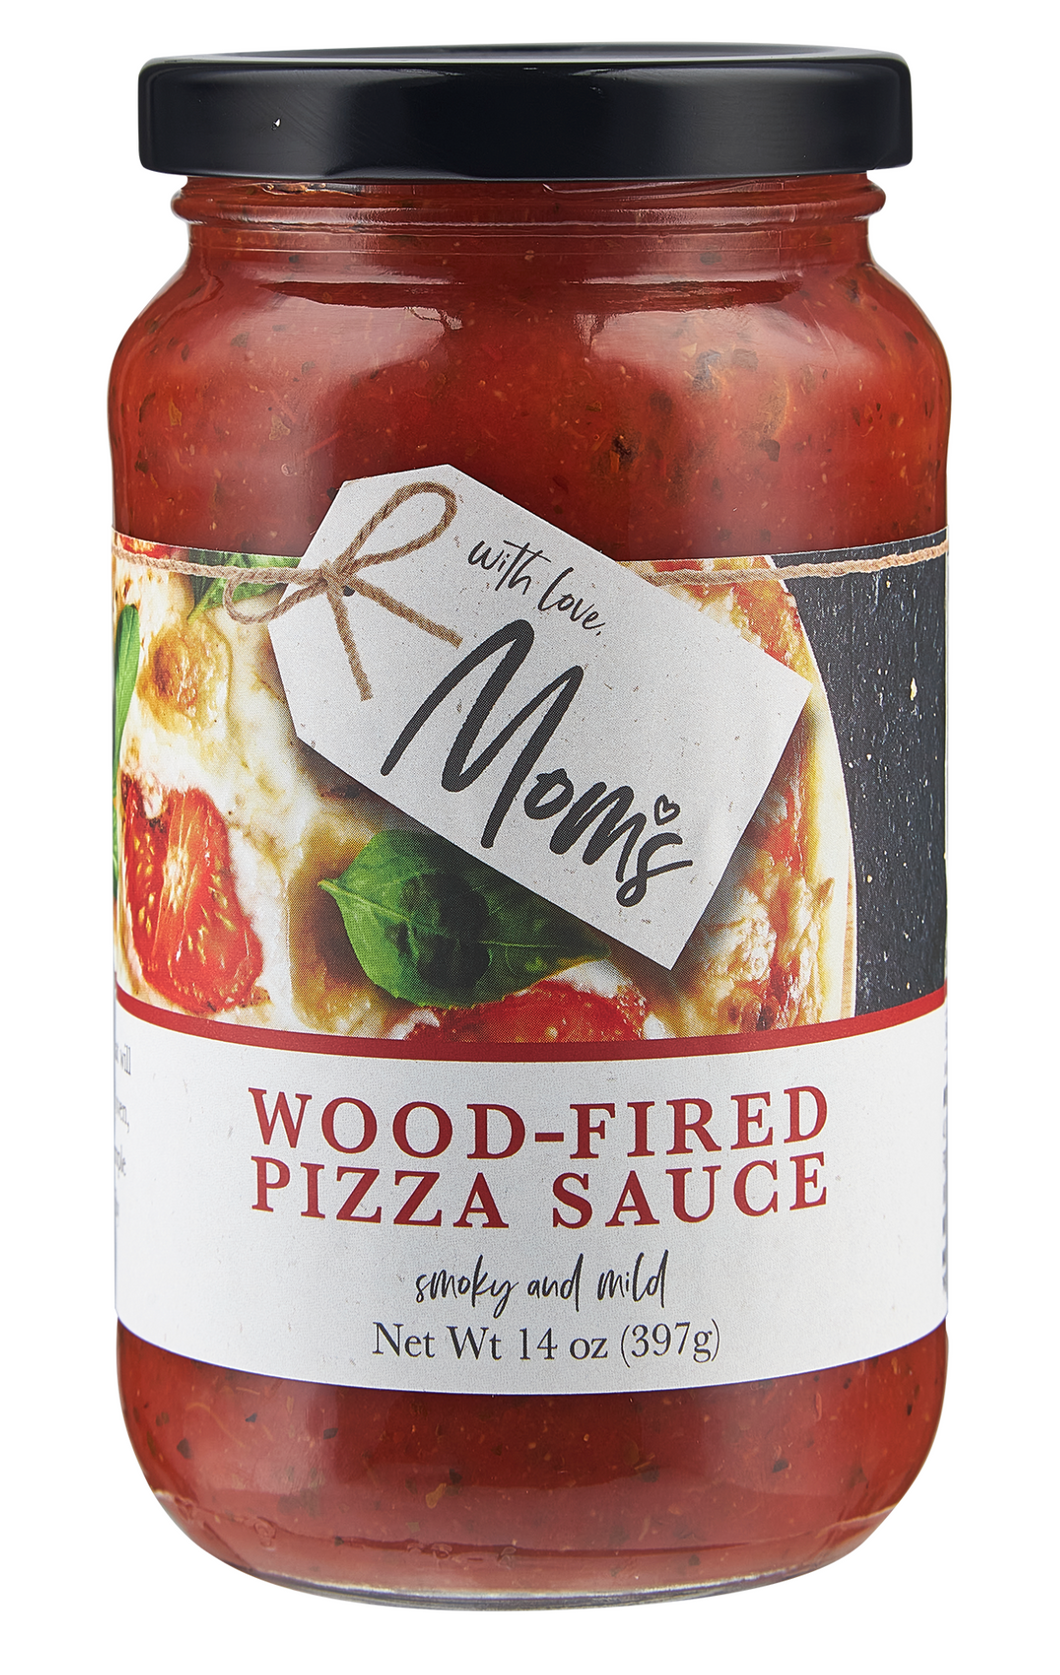 WOOD-FIRED PIZZA SAUCE